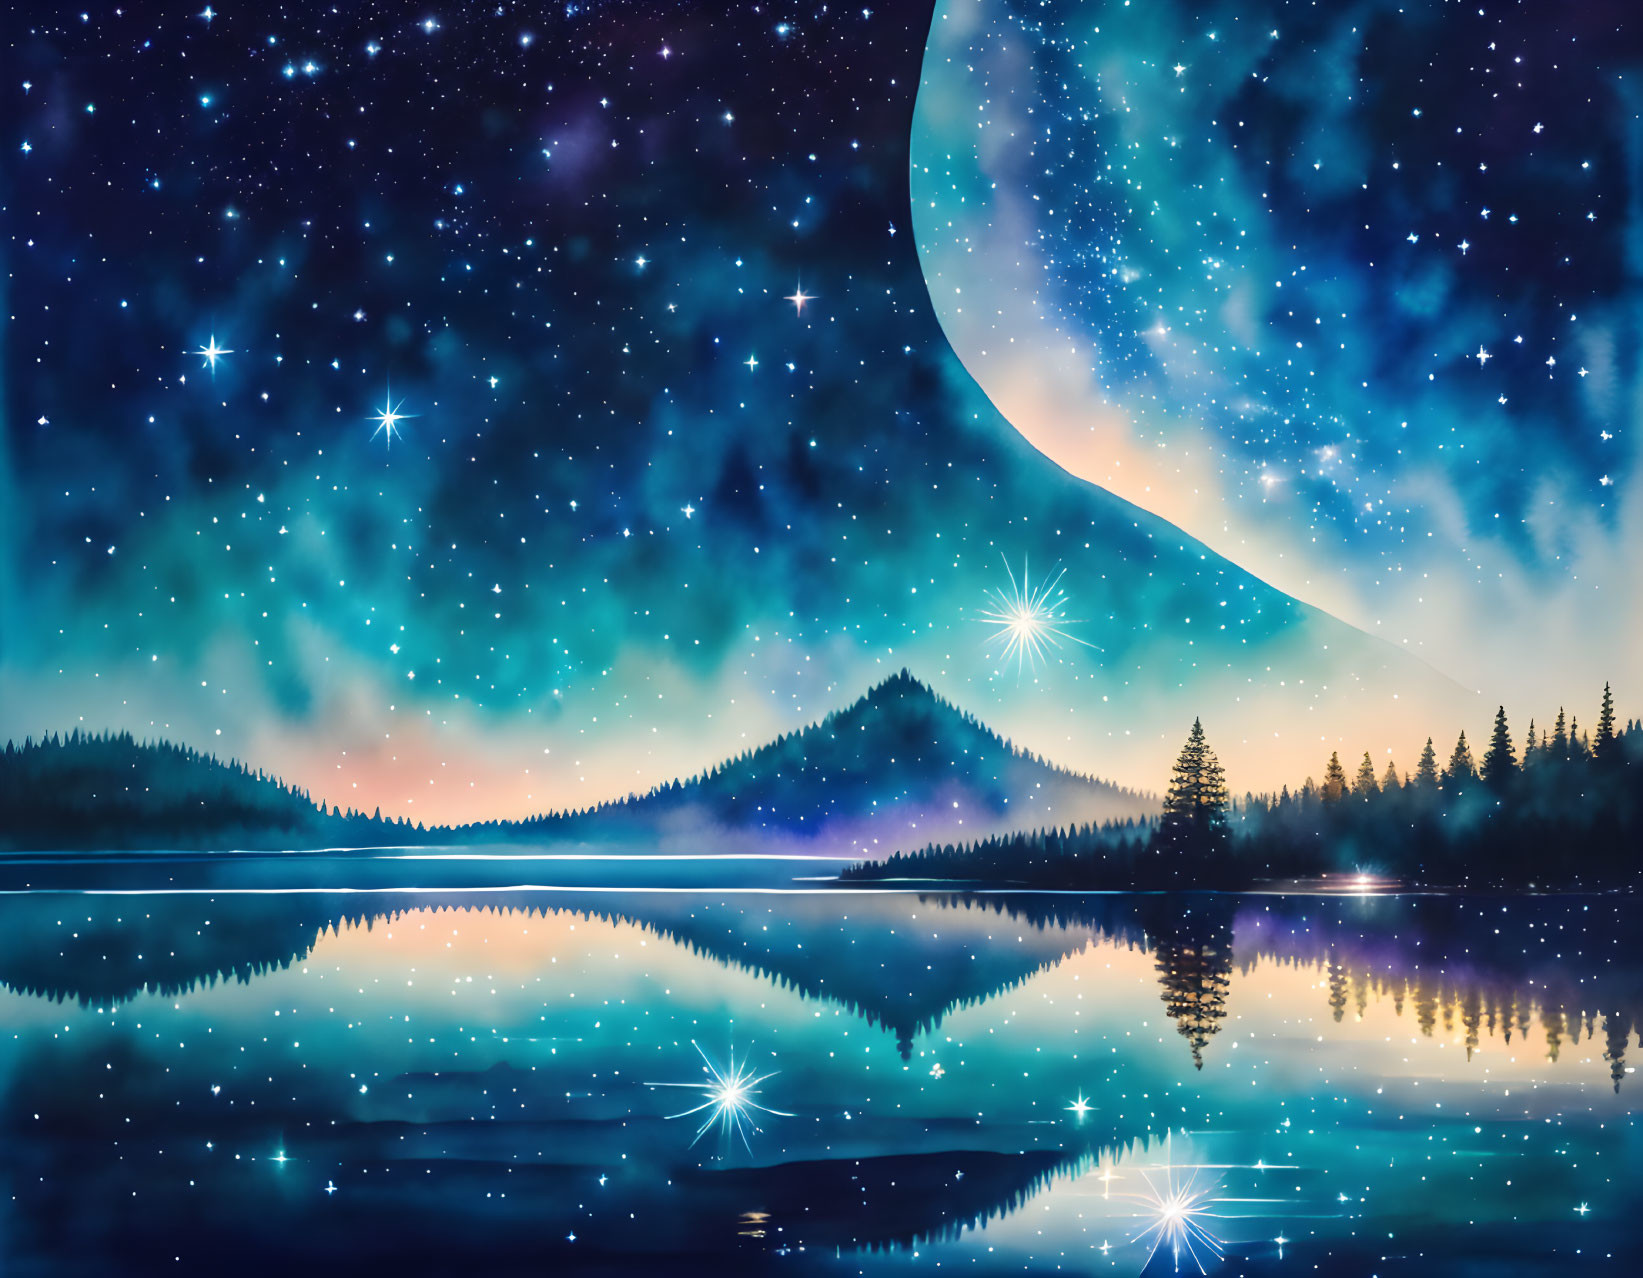 Starry night sky reflected in serene lake with crescent moon